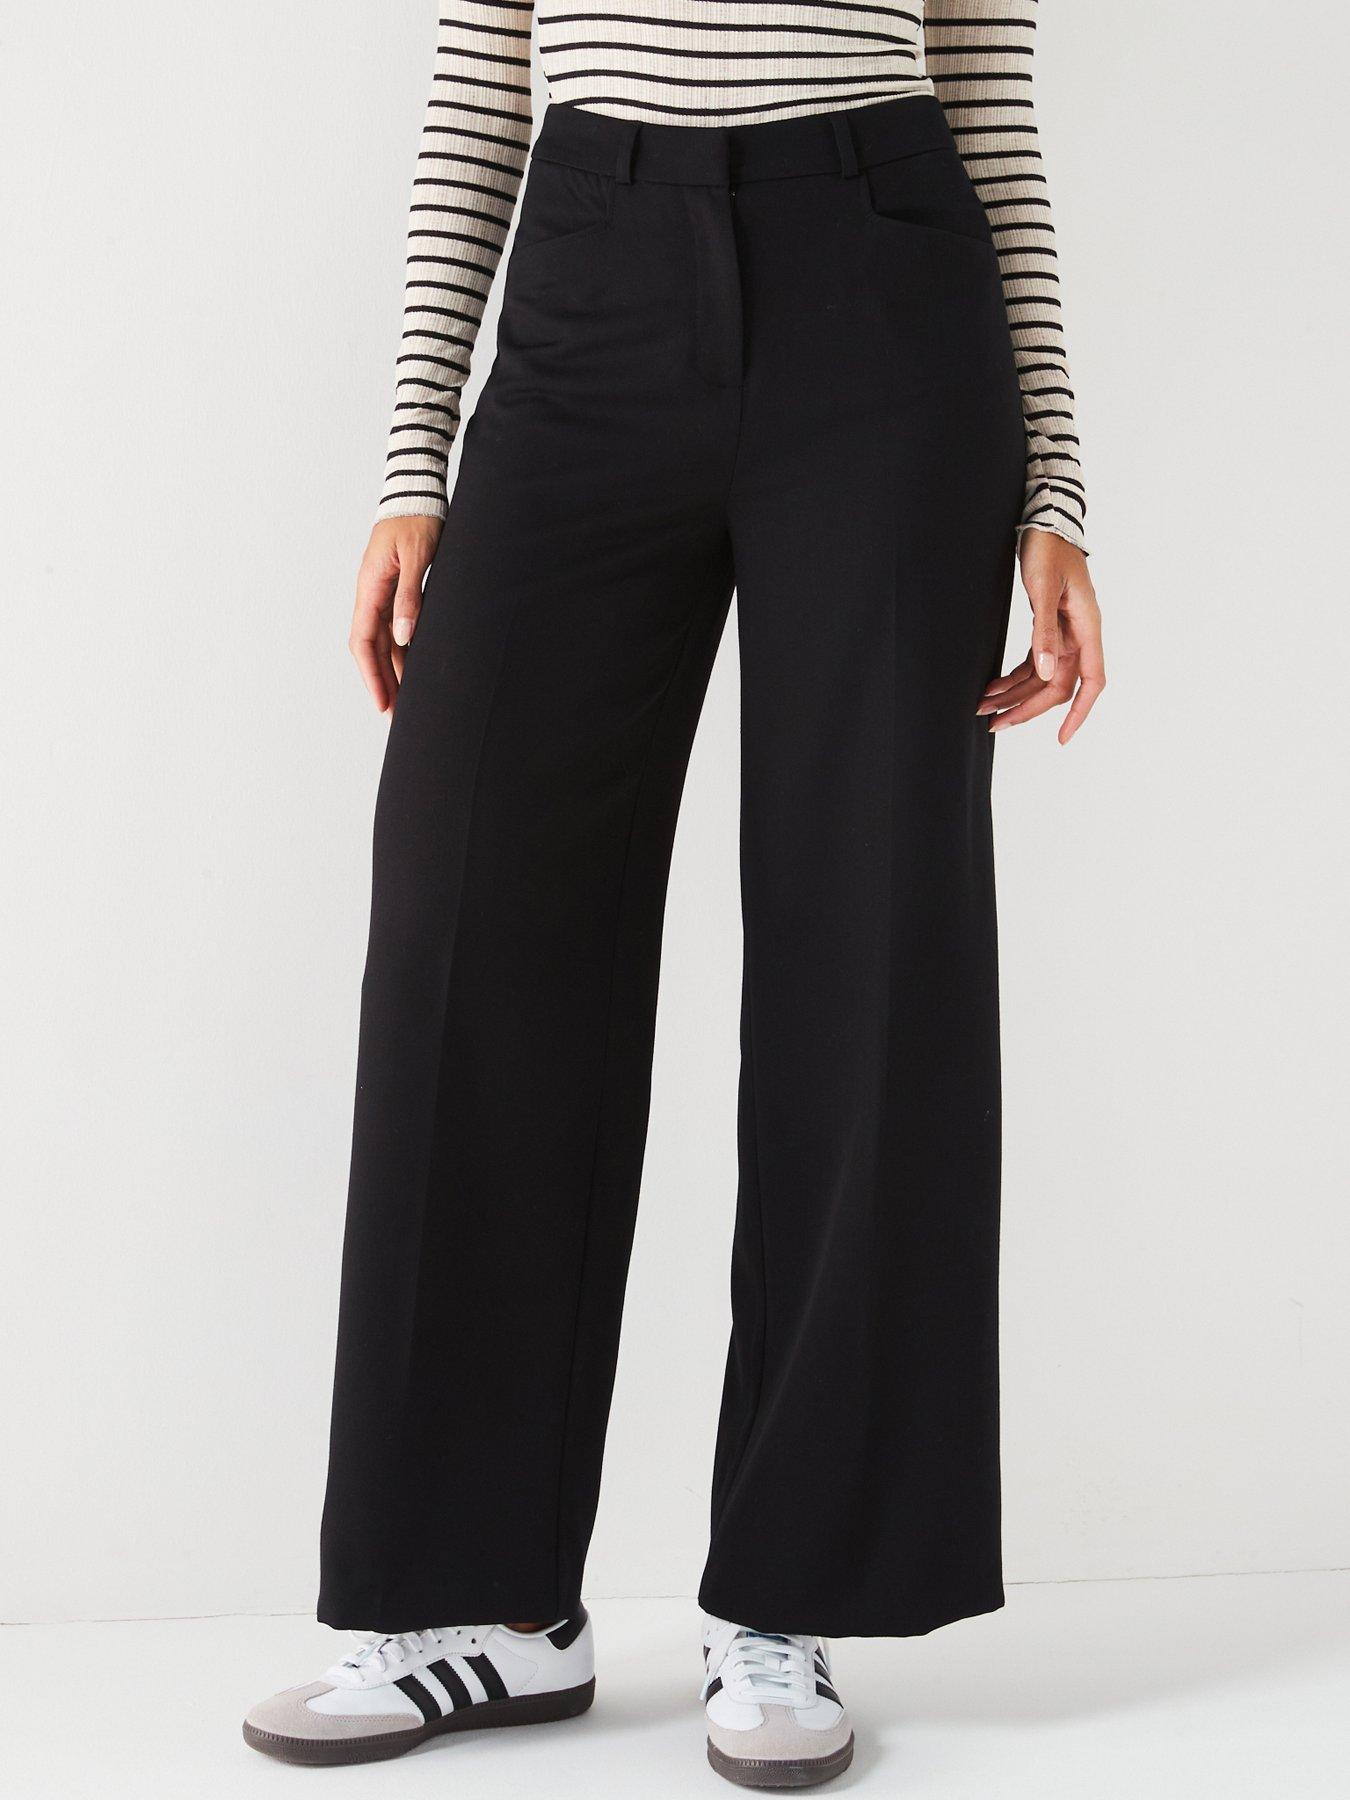 Buy Lipsy Black High Waisted Contour Bootleg Flared Trousers from the Next  UK online shop